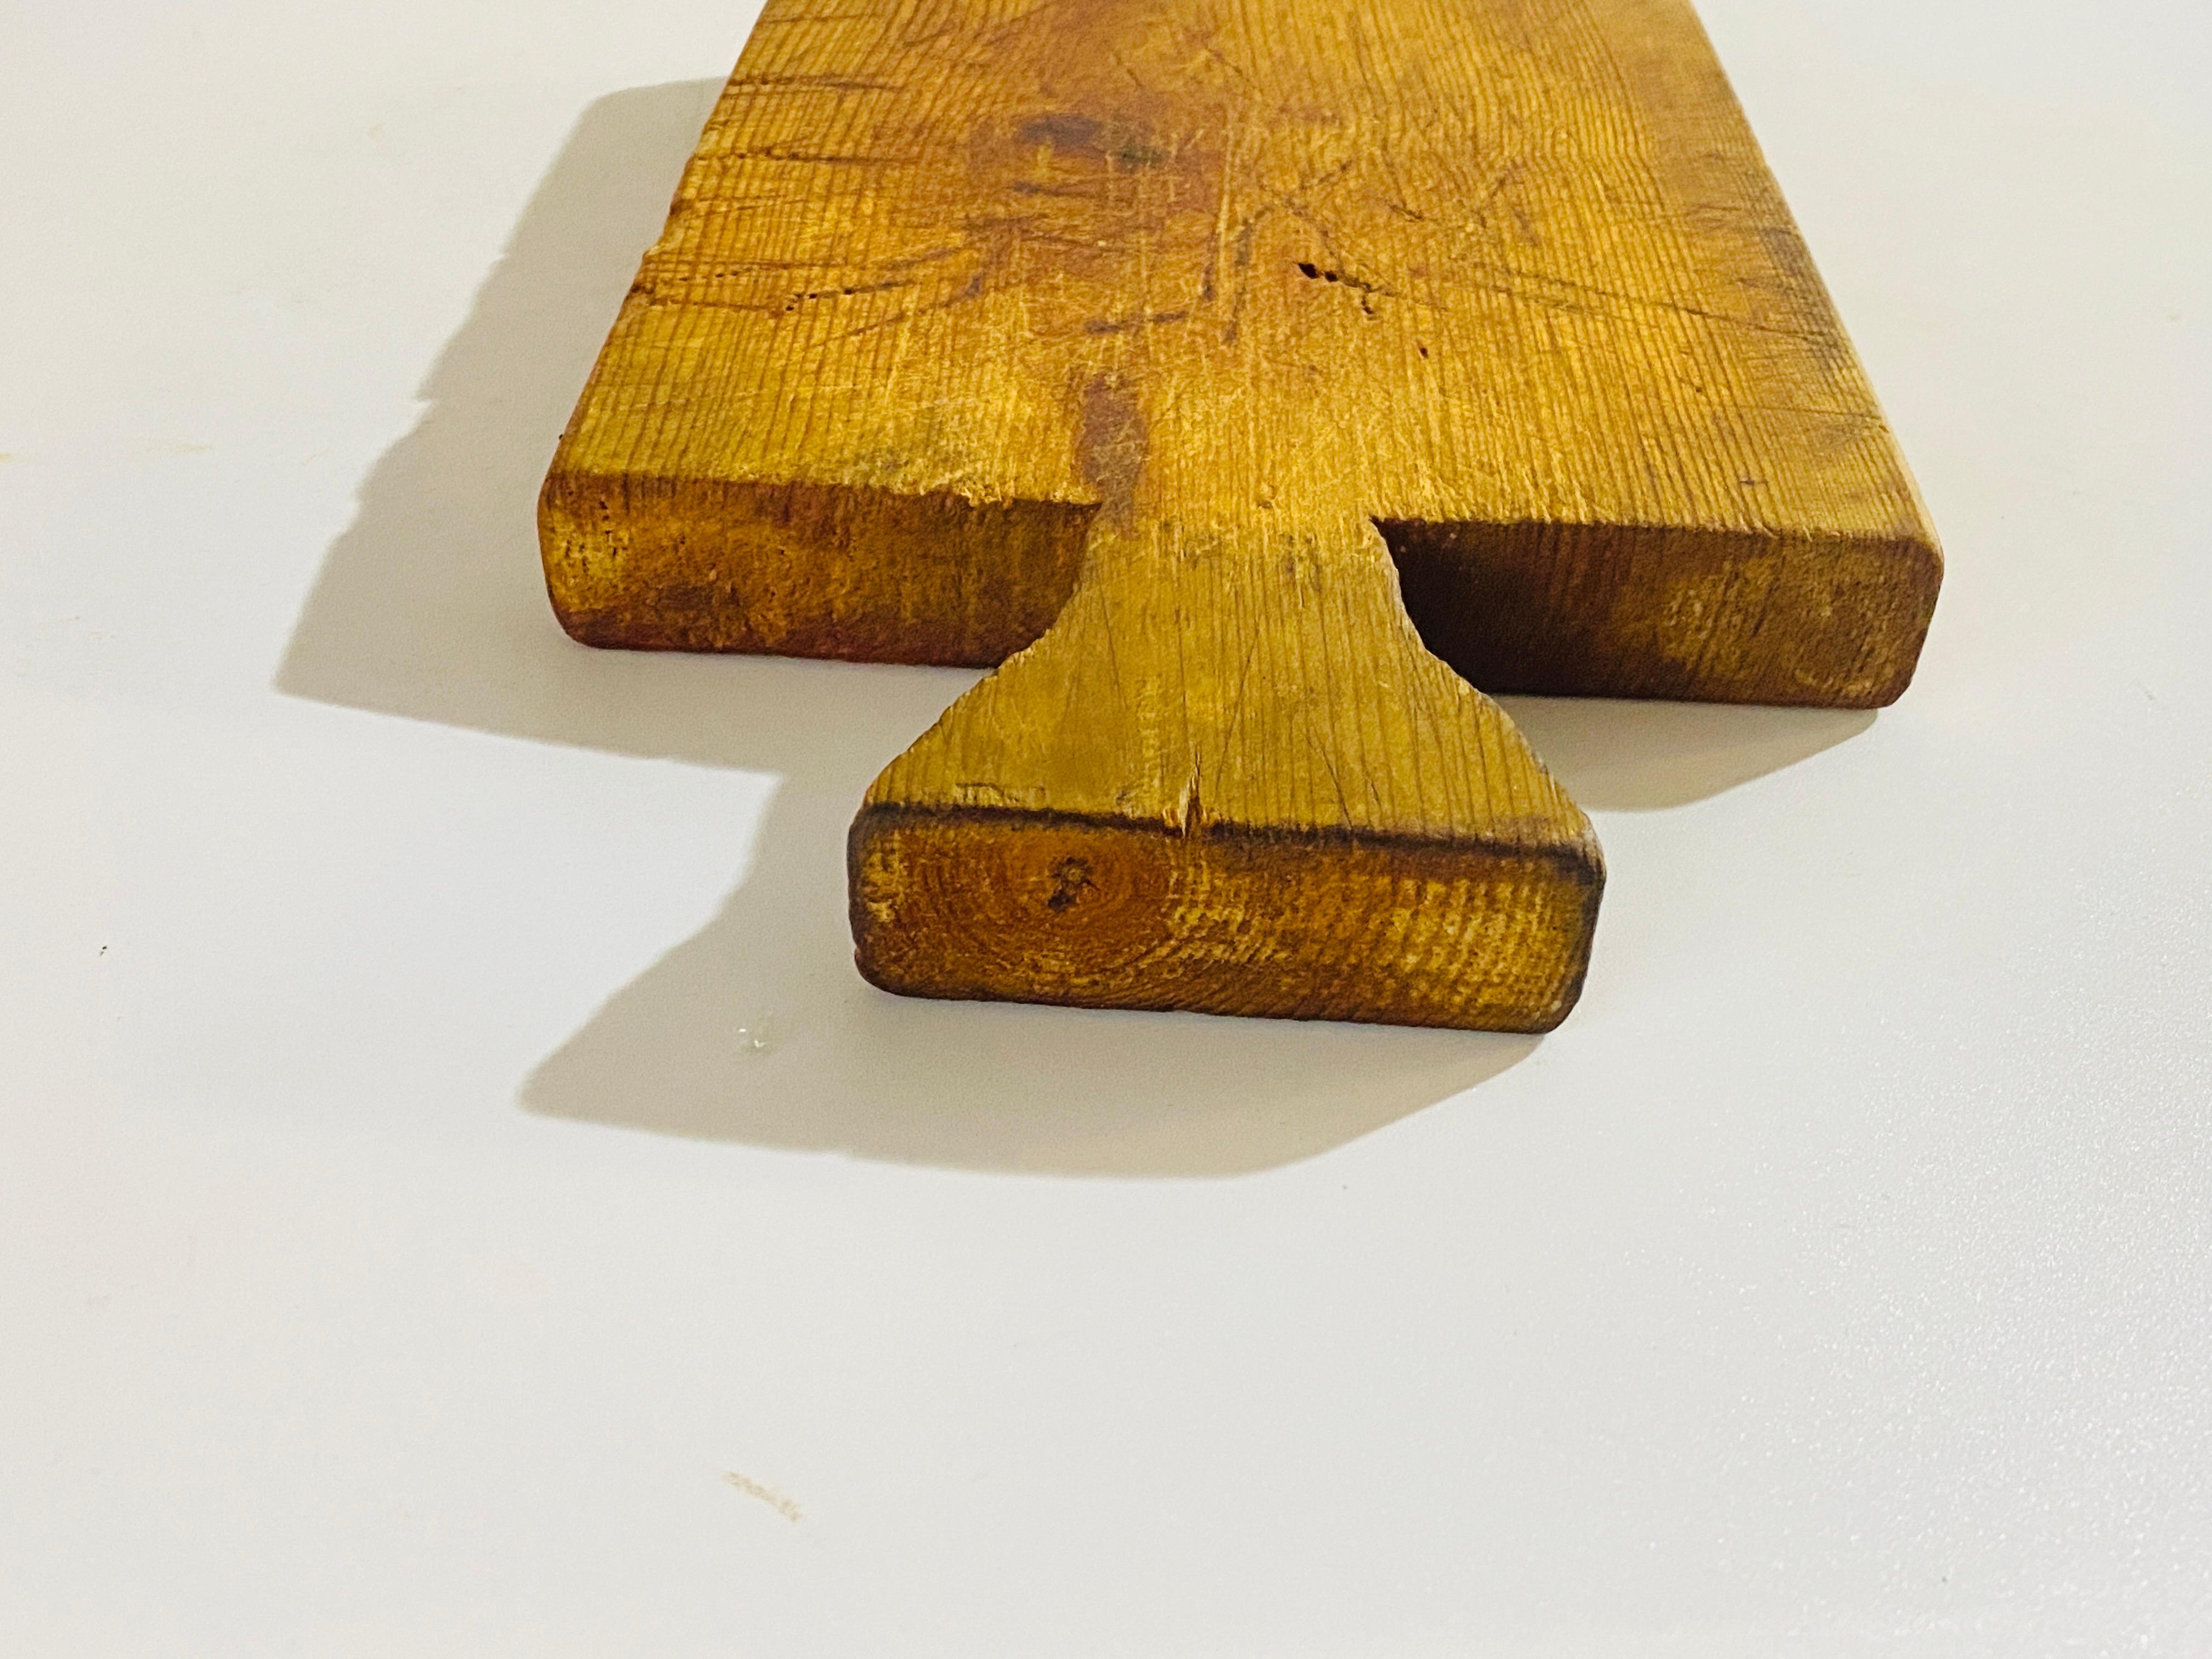 Wooden Chopping or Cutting Board Old Patina, Brown Color, French, 20th Century In Fair Condition For Sale In Auribeau sur Siagne, FR